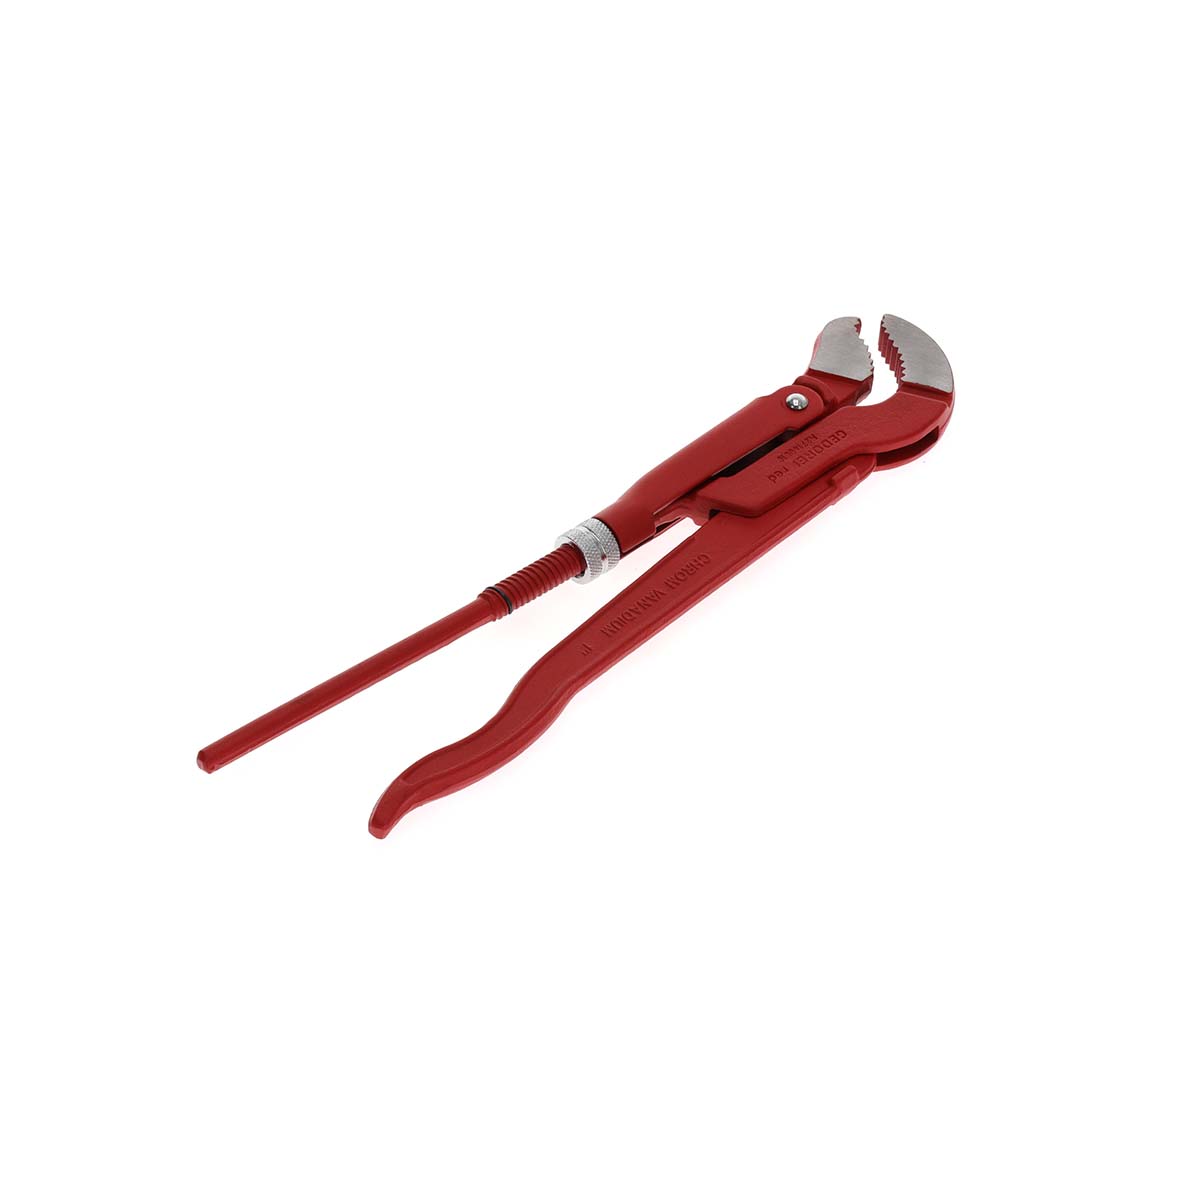 GEDORE red R27140010 - Pipe pliers, S-mouth, 1", L=325 mm (3301167)